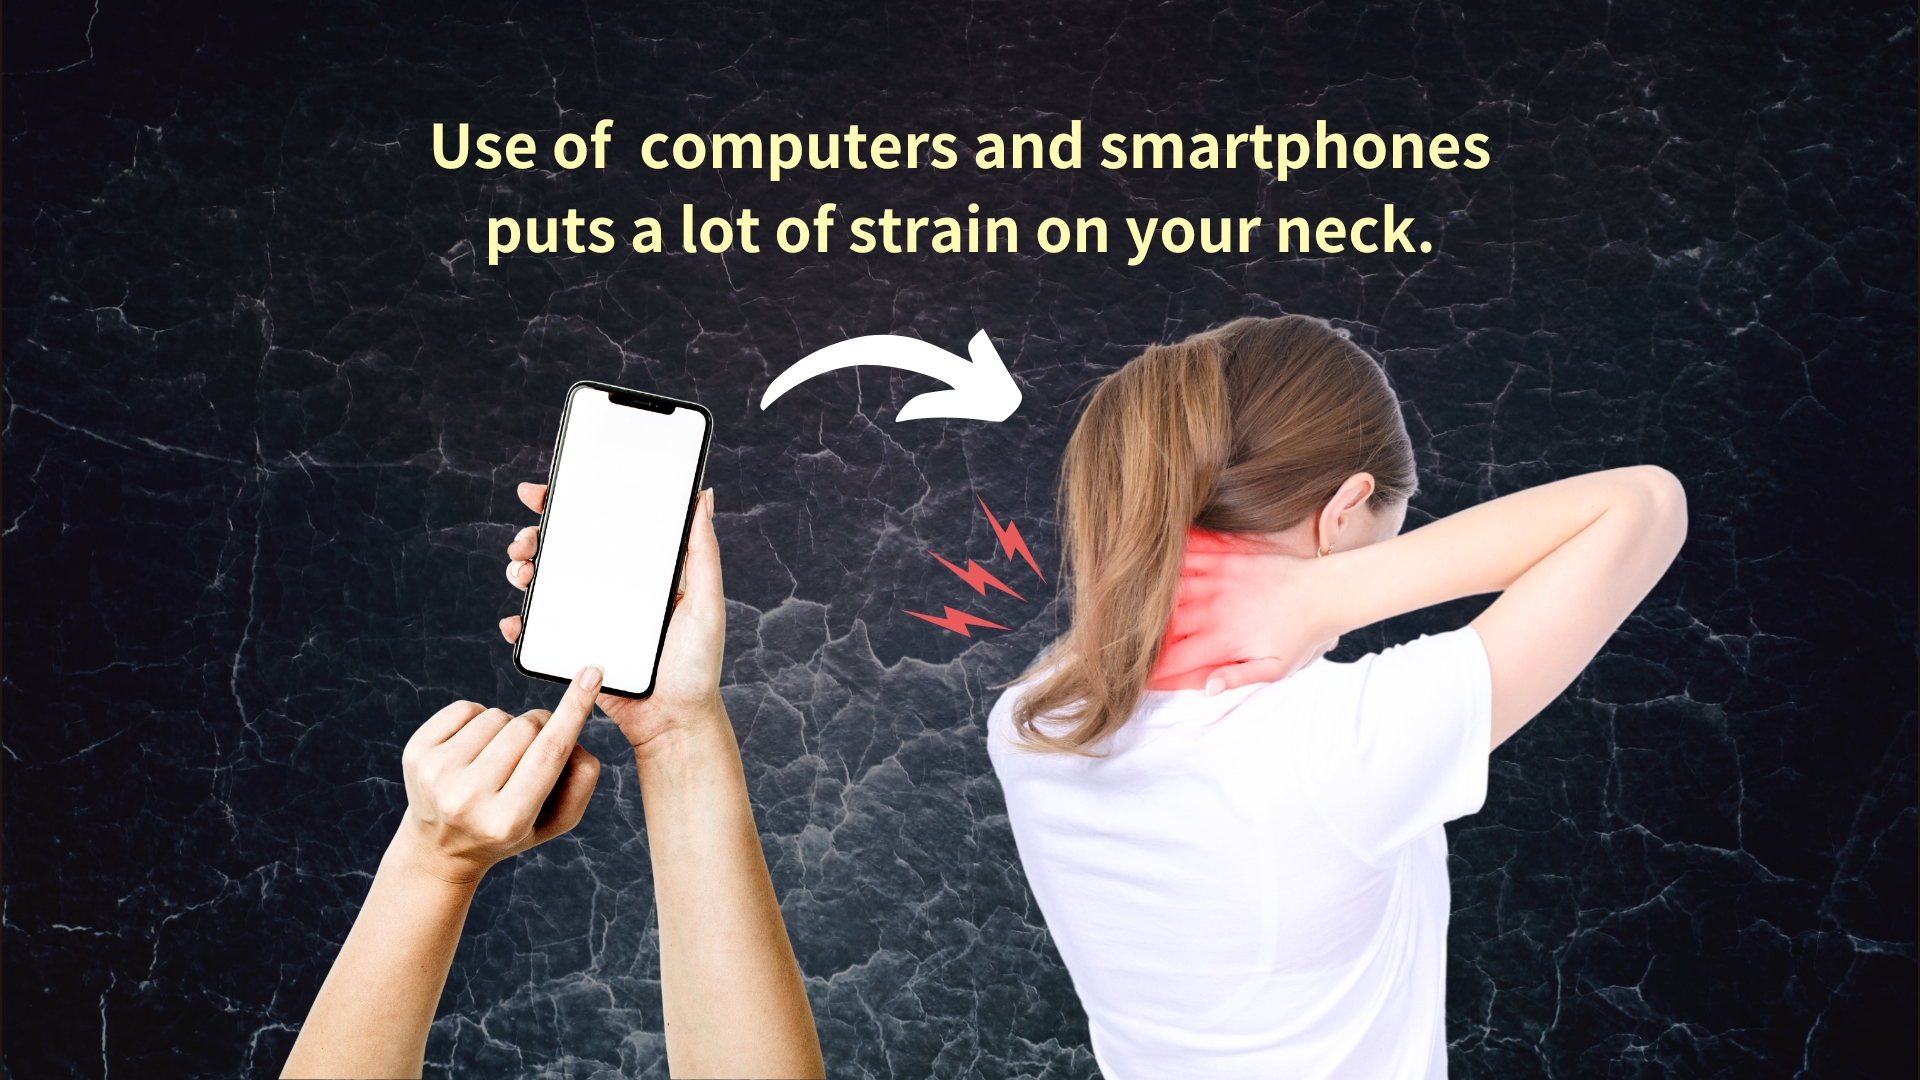 use of devices puts strain on your neck